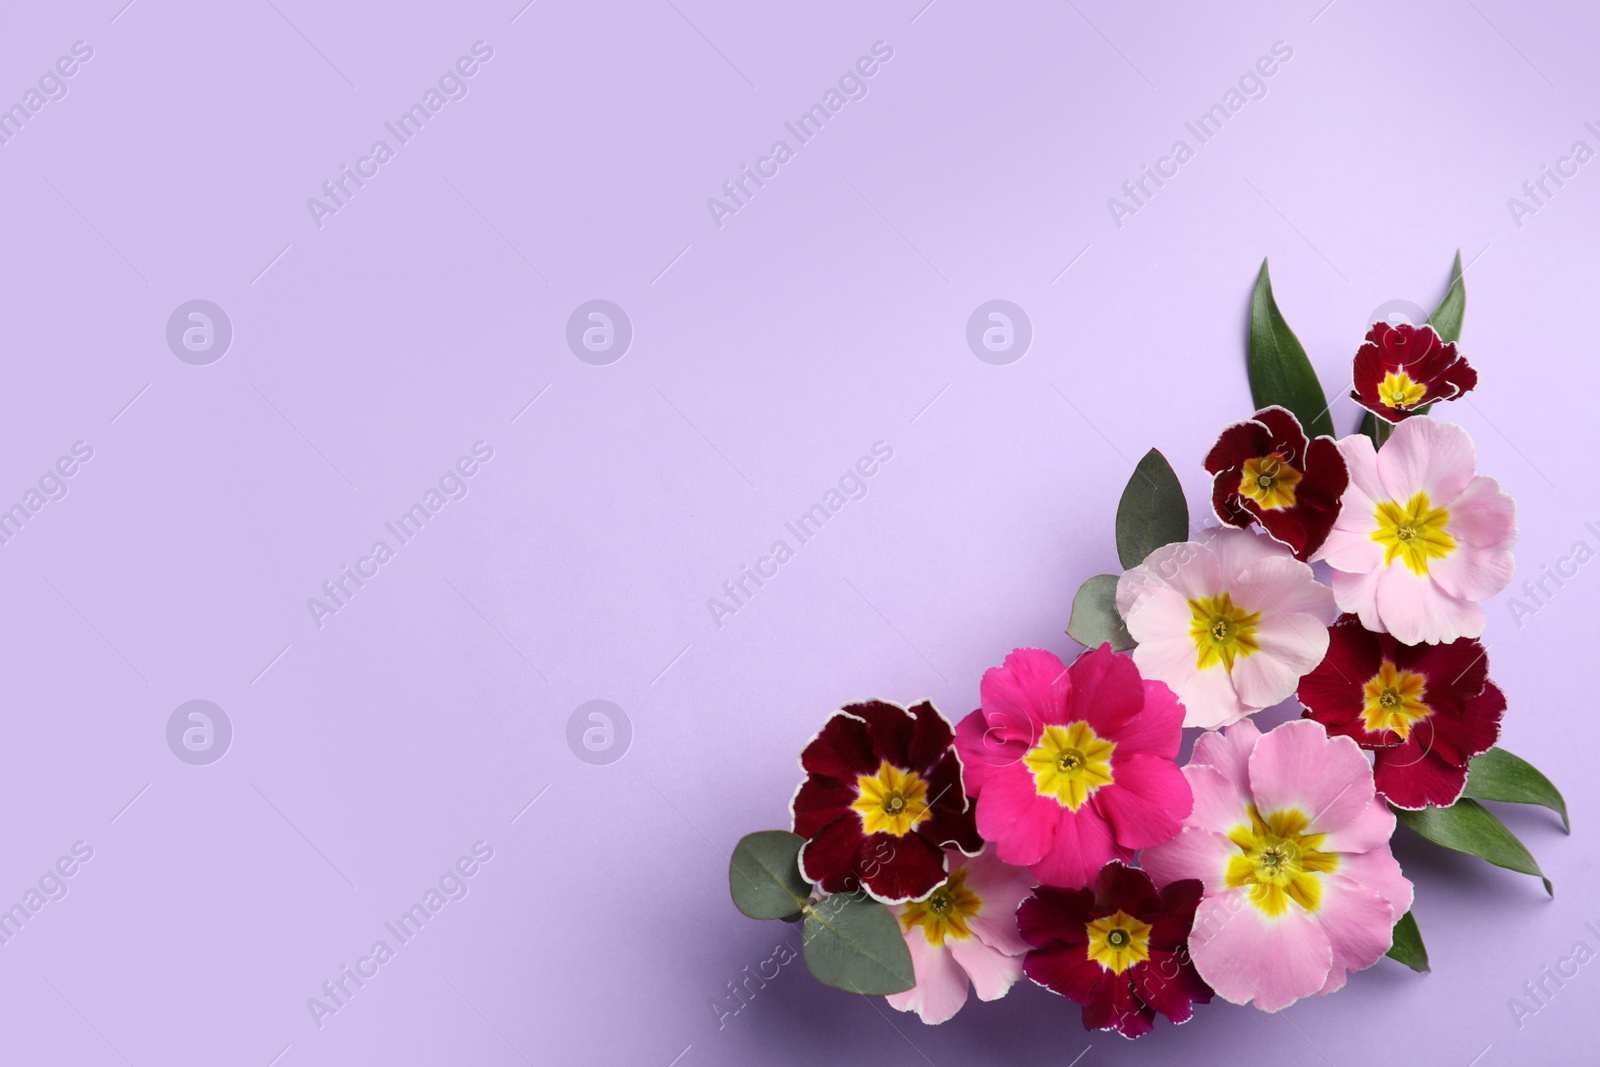 Photo of Primrose Primula Vulgaris flowers on violet background, top view with space for text. Spring season